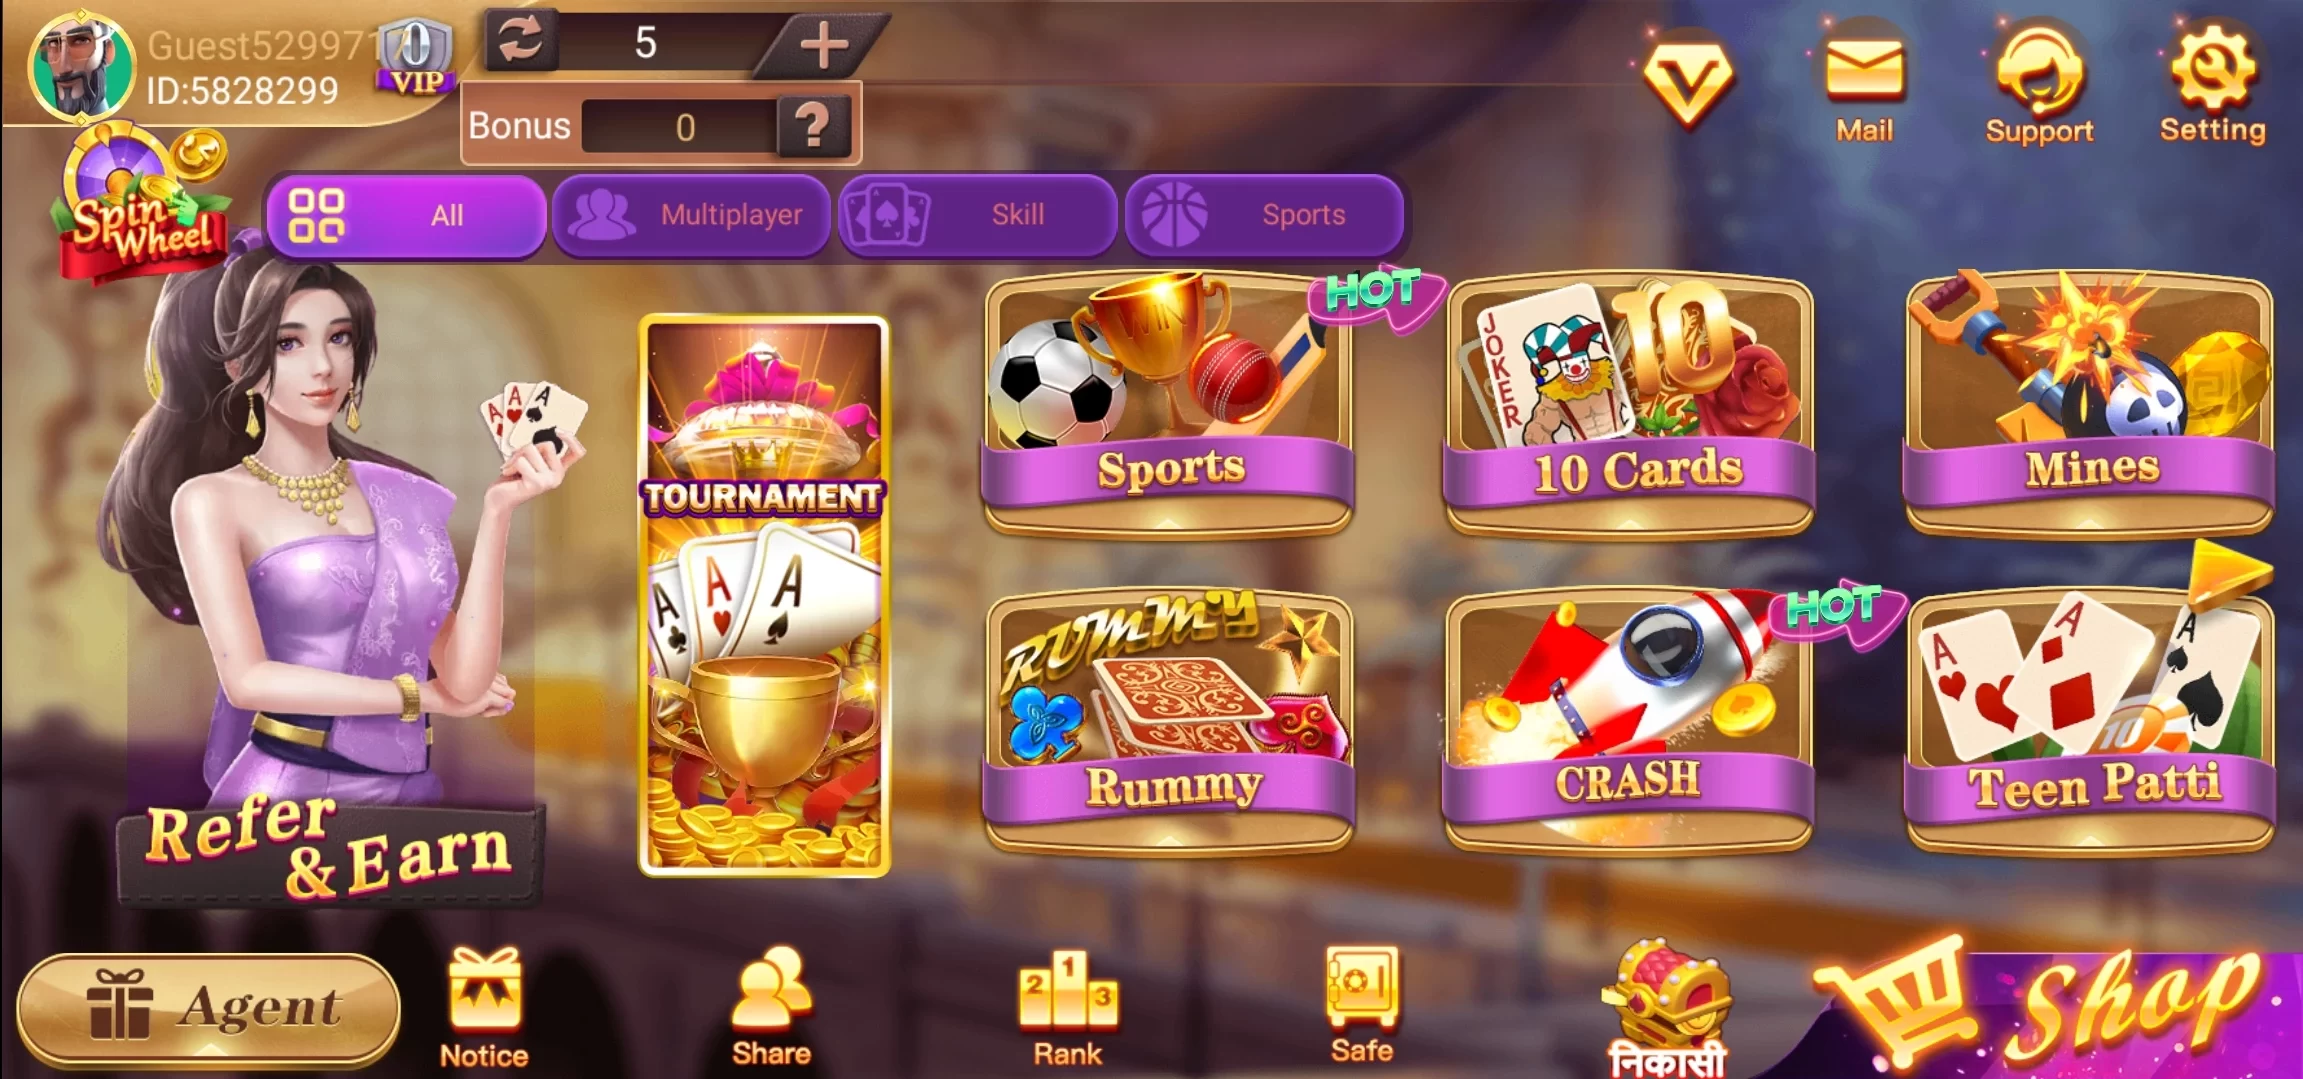 Games Available On Teen Patti Royal